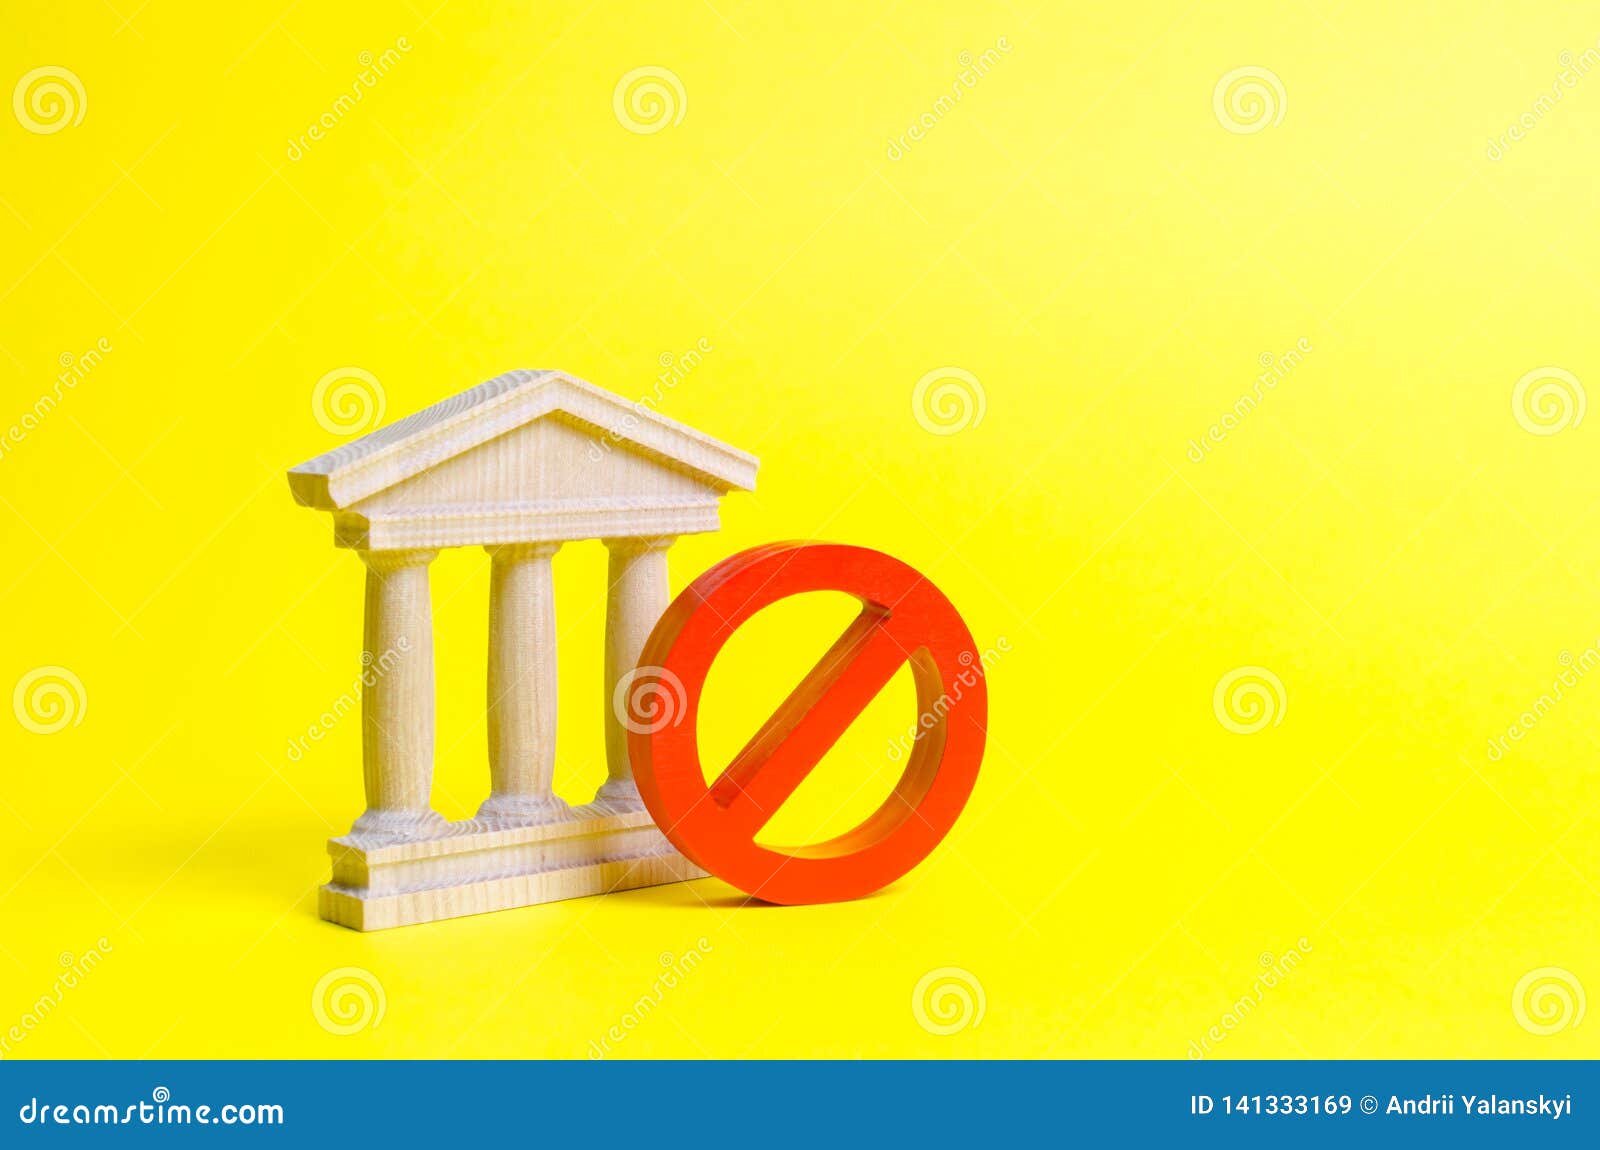 government building or bank and  no on an yellow background. the concept of prohibiting and restrictive laws. bans